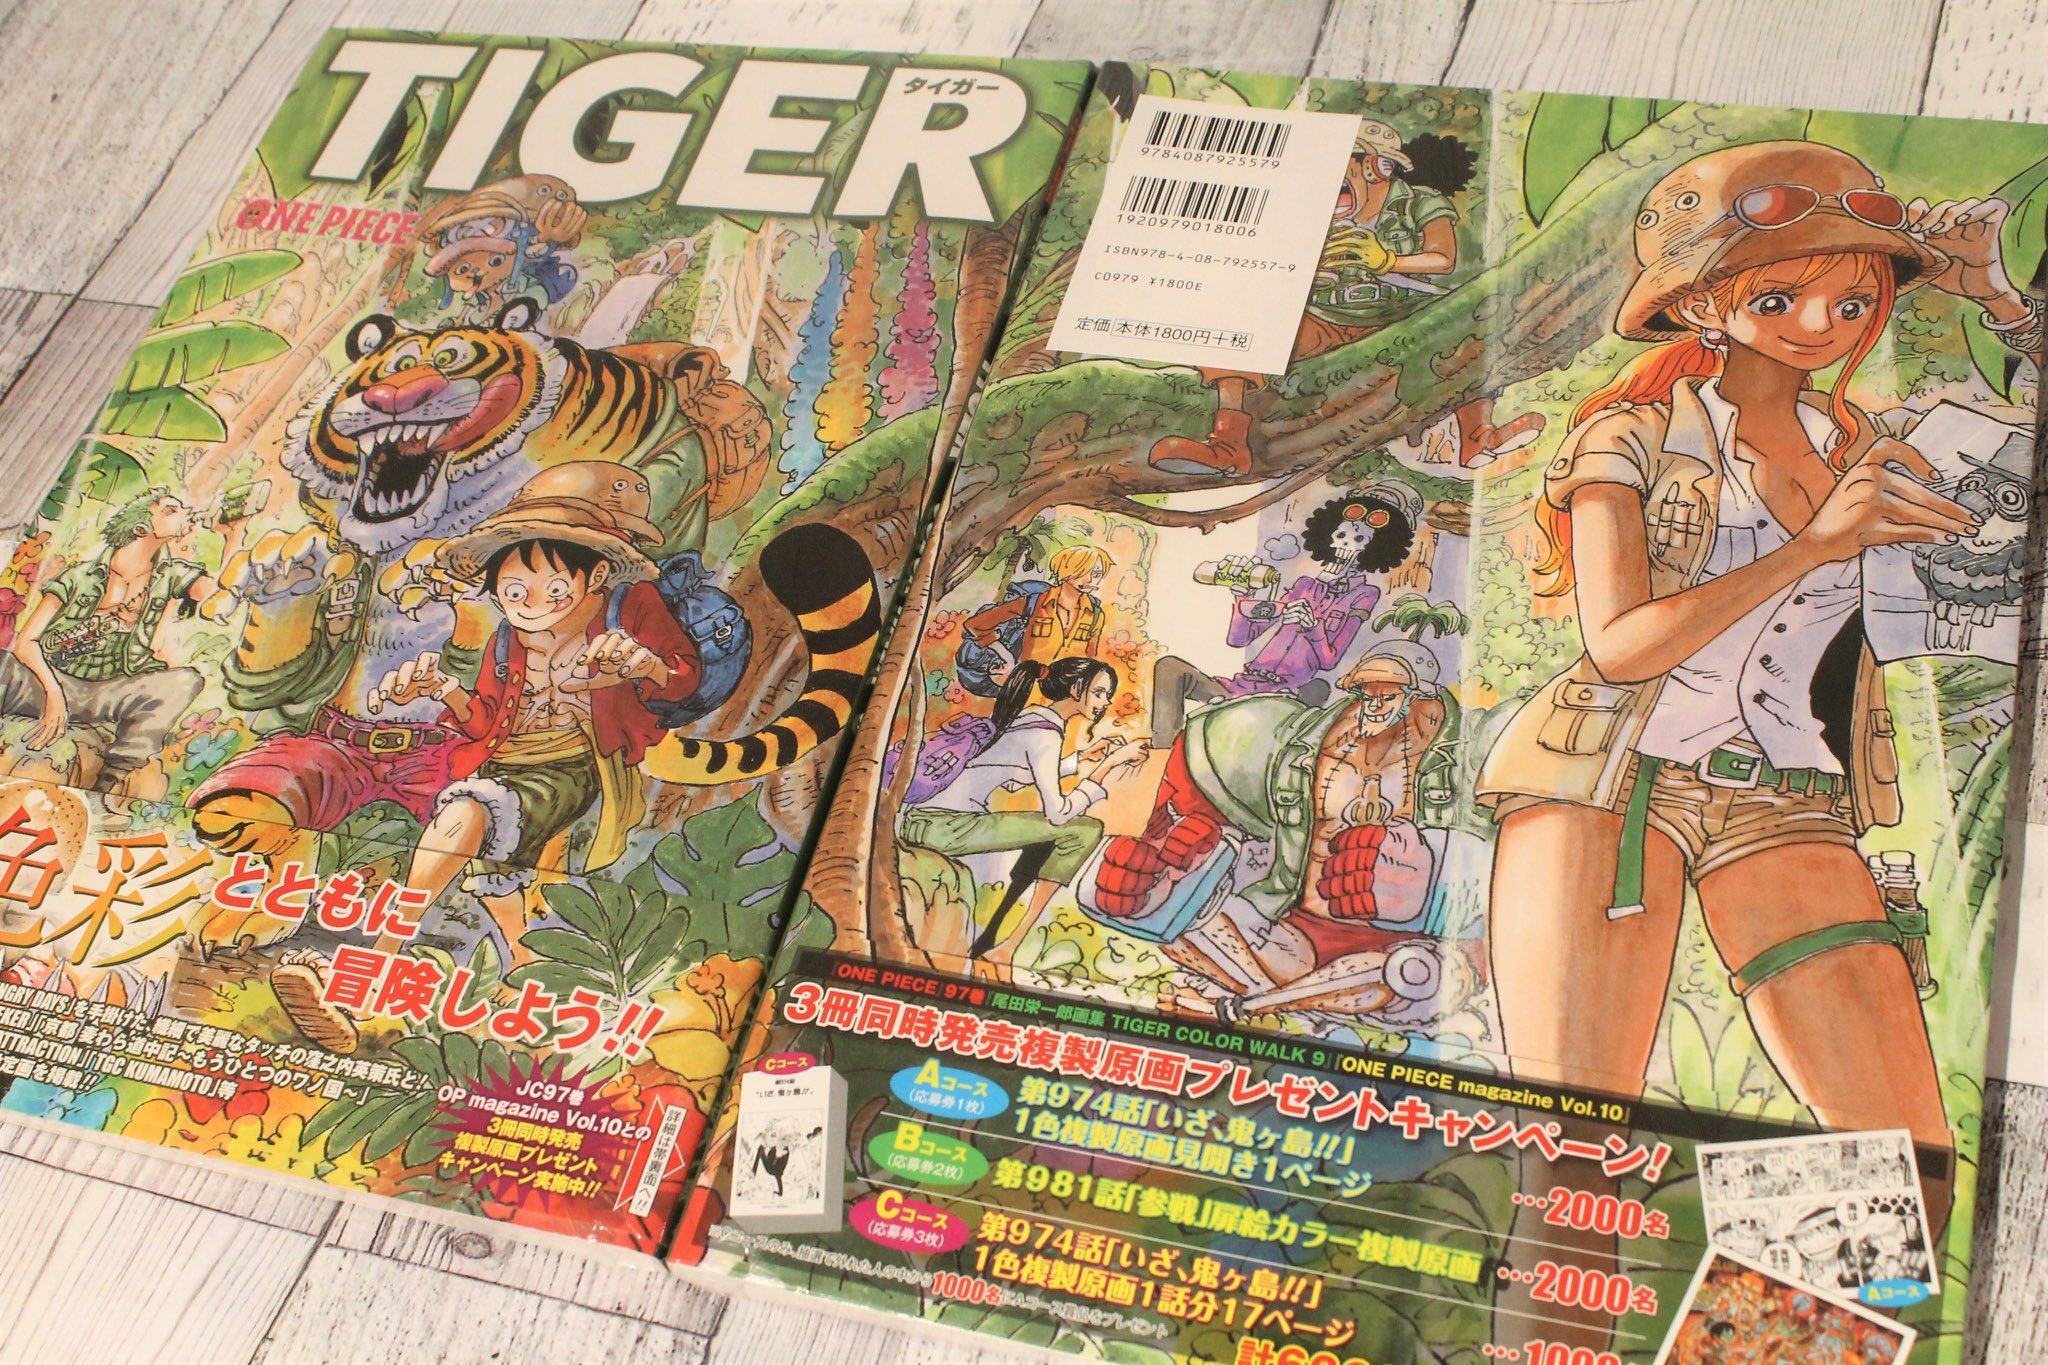 One Piece麦わらストア渋谷本店 おすすめ 尾田栄一郎画集 Tiger Color Wark 9 1 980円 税込 好評発売中 麦わらストア Onepiece T Co Zhihsymq3l Twitter